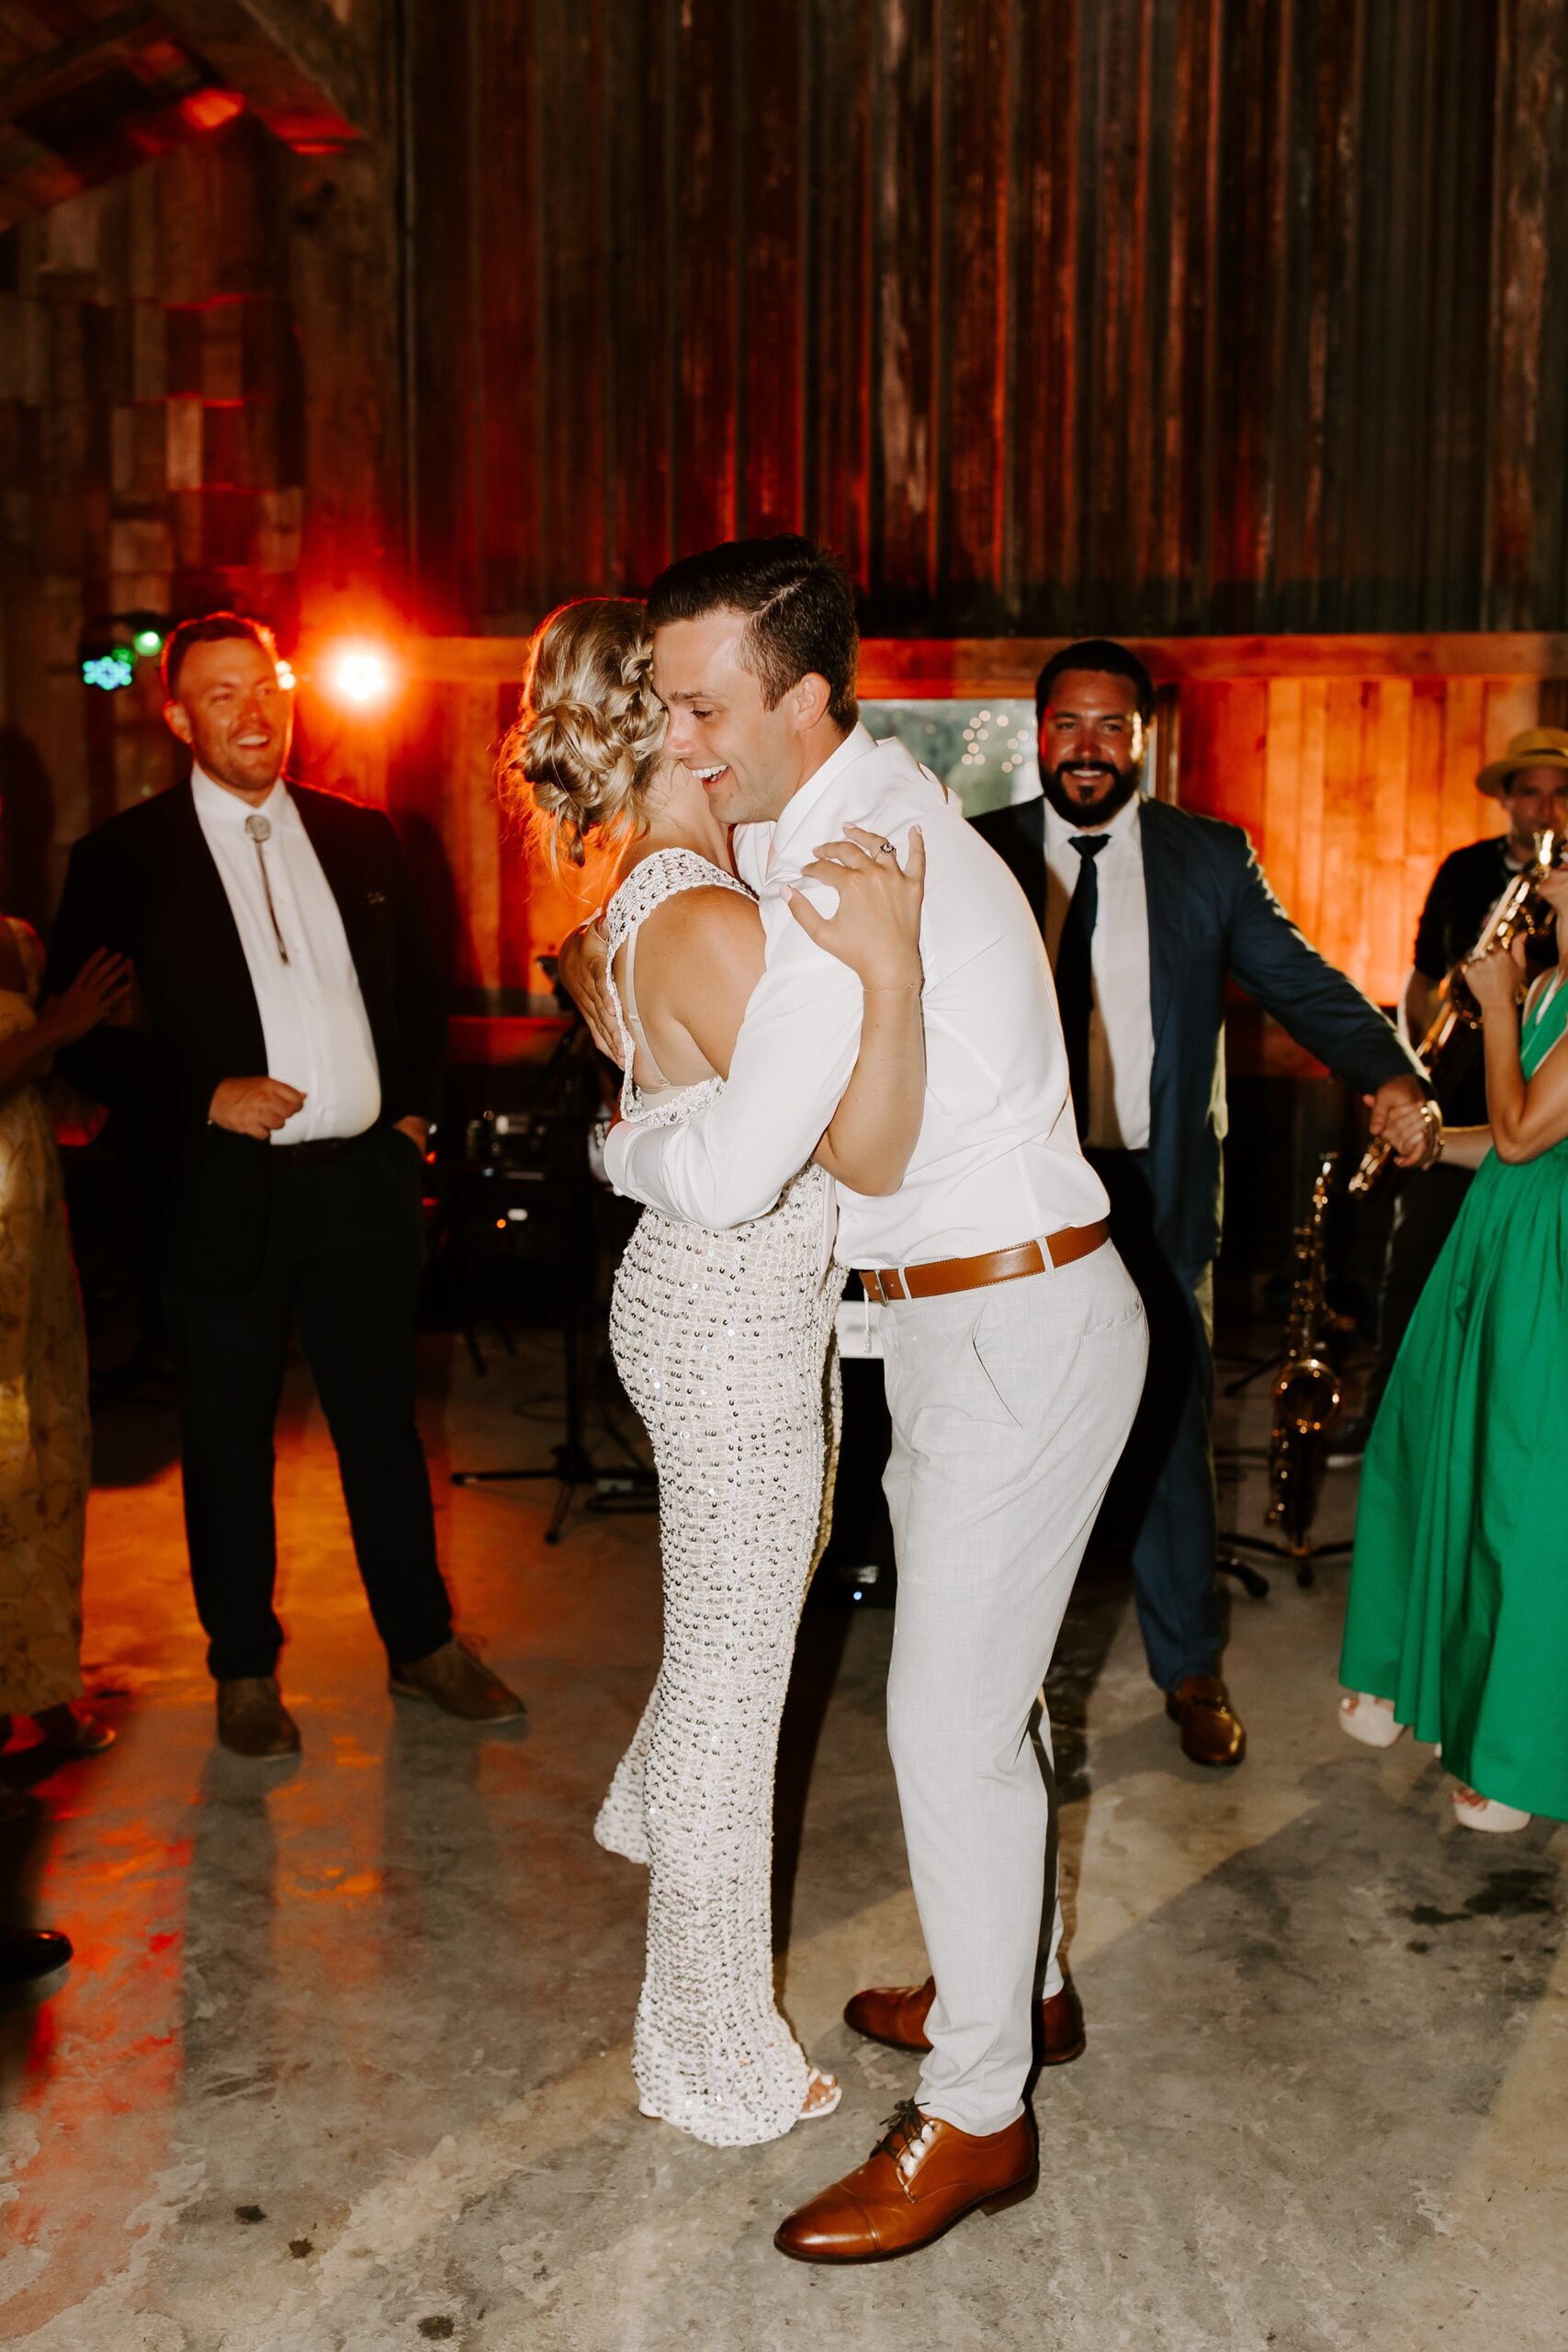 Bride and groom on the dance floor at their Mountain Star Estate wedding reception